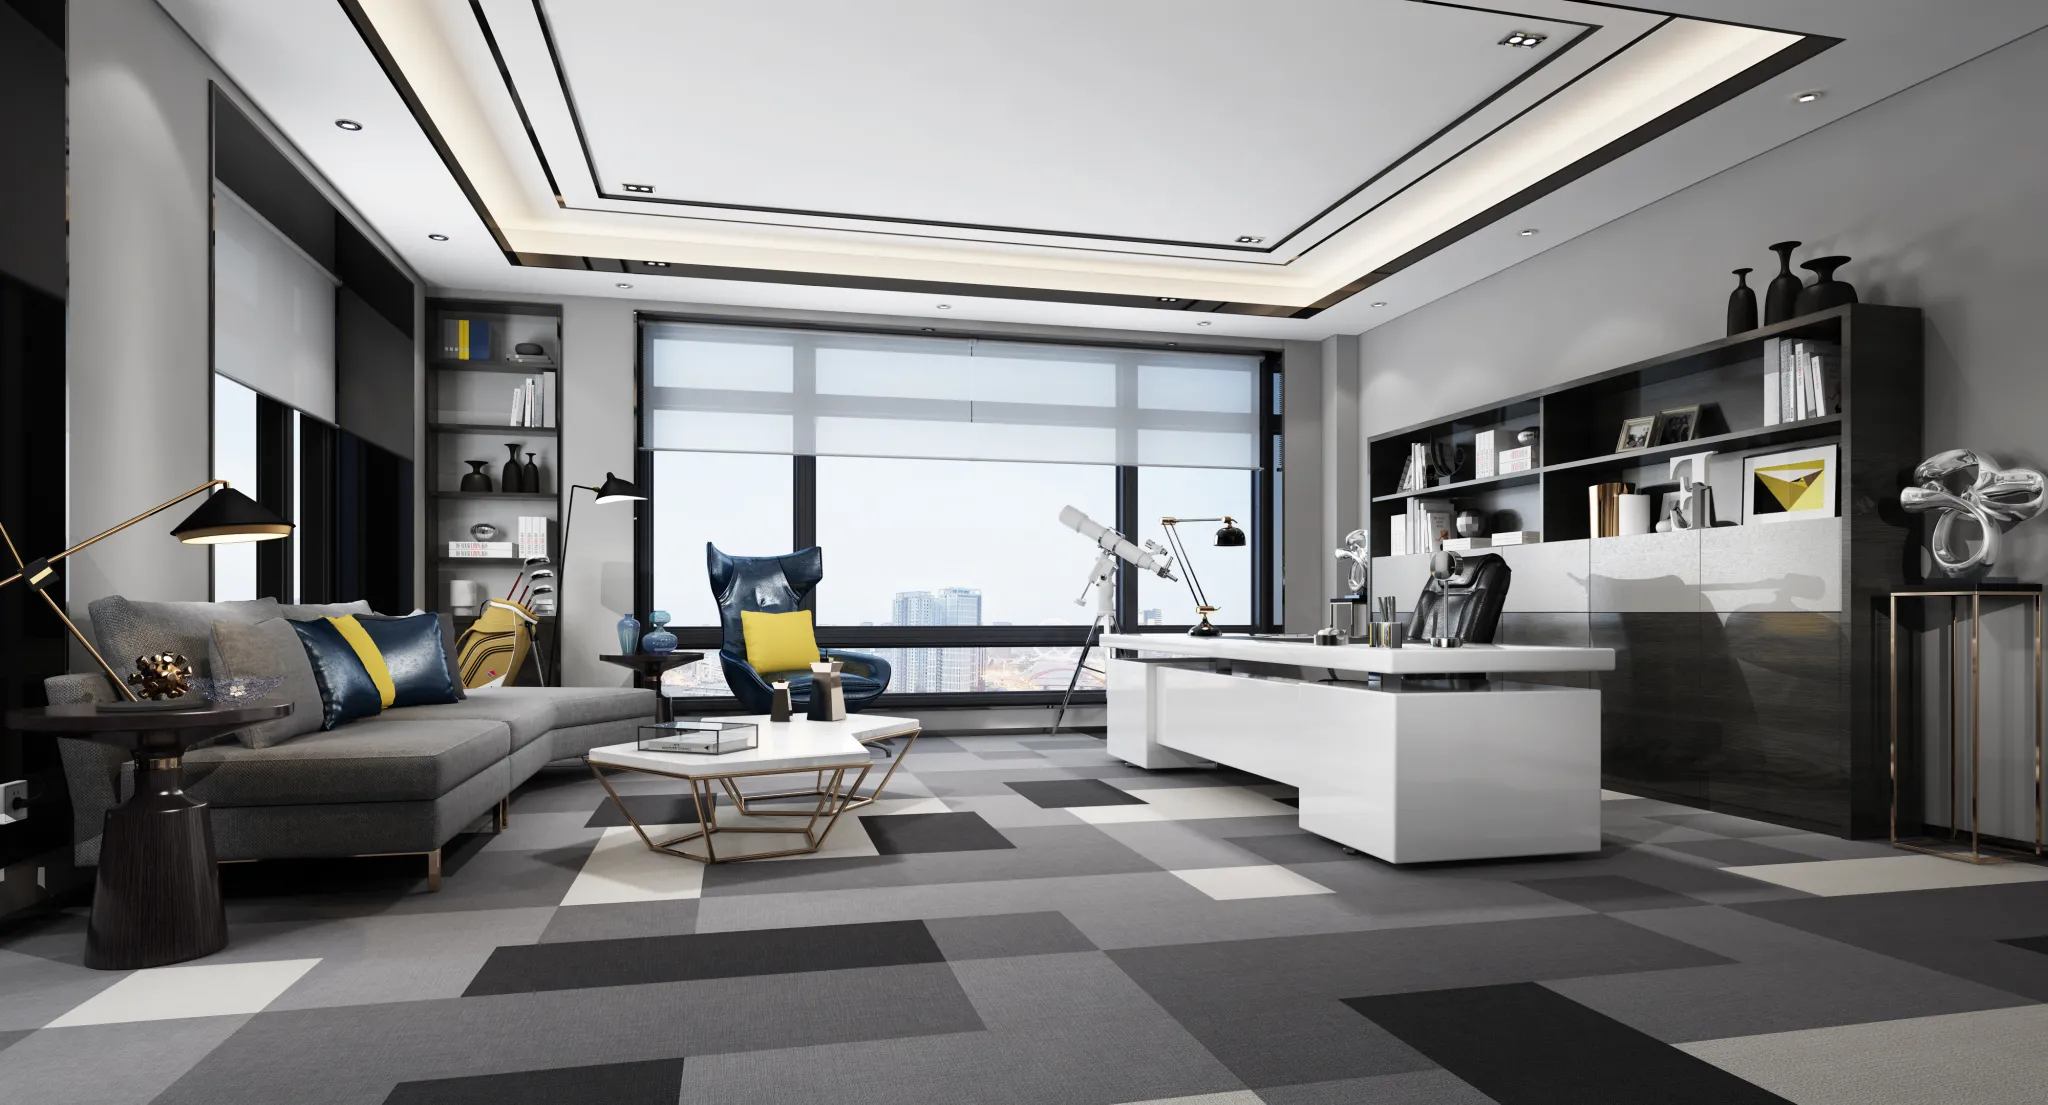 3D OFFICE INTERIOR (VRAY) – MANAGER ROOM 3D SCENES – 145